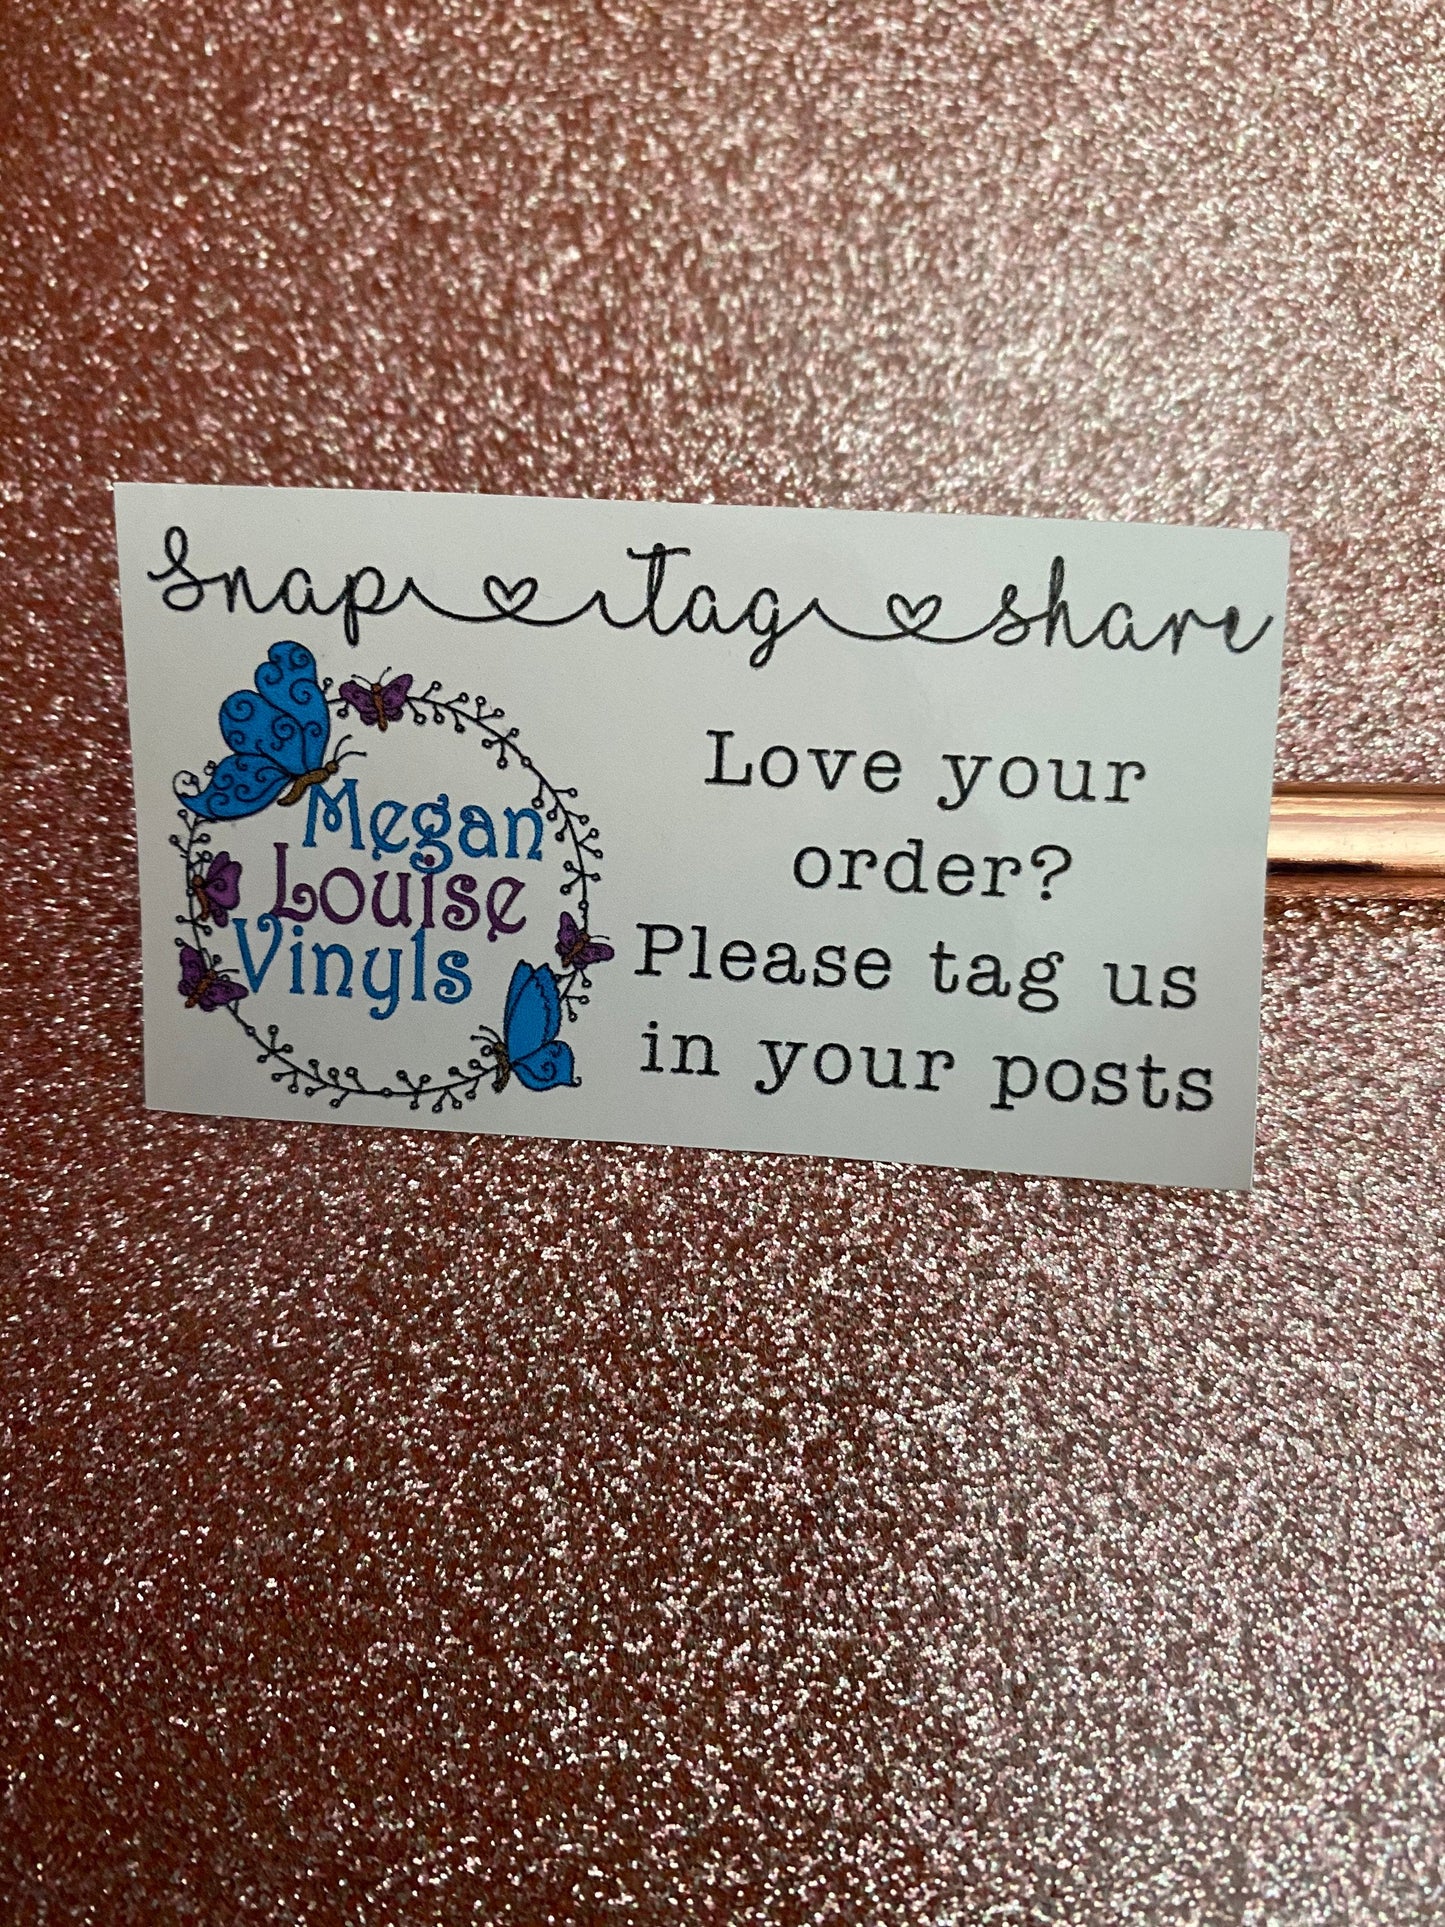 Snap tag share logo stickers